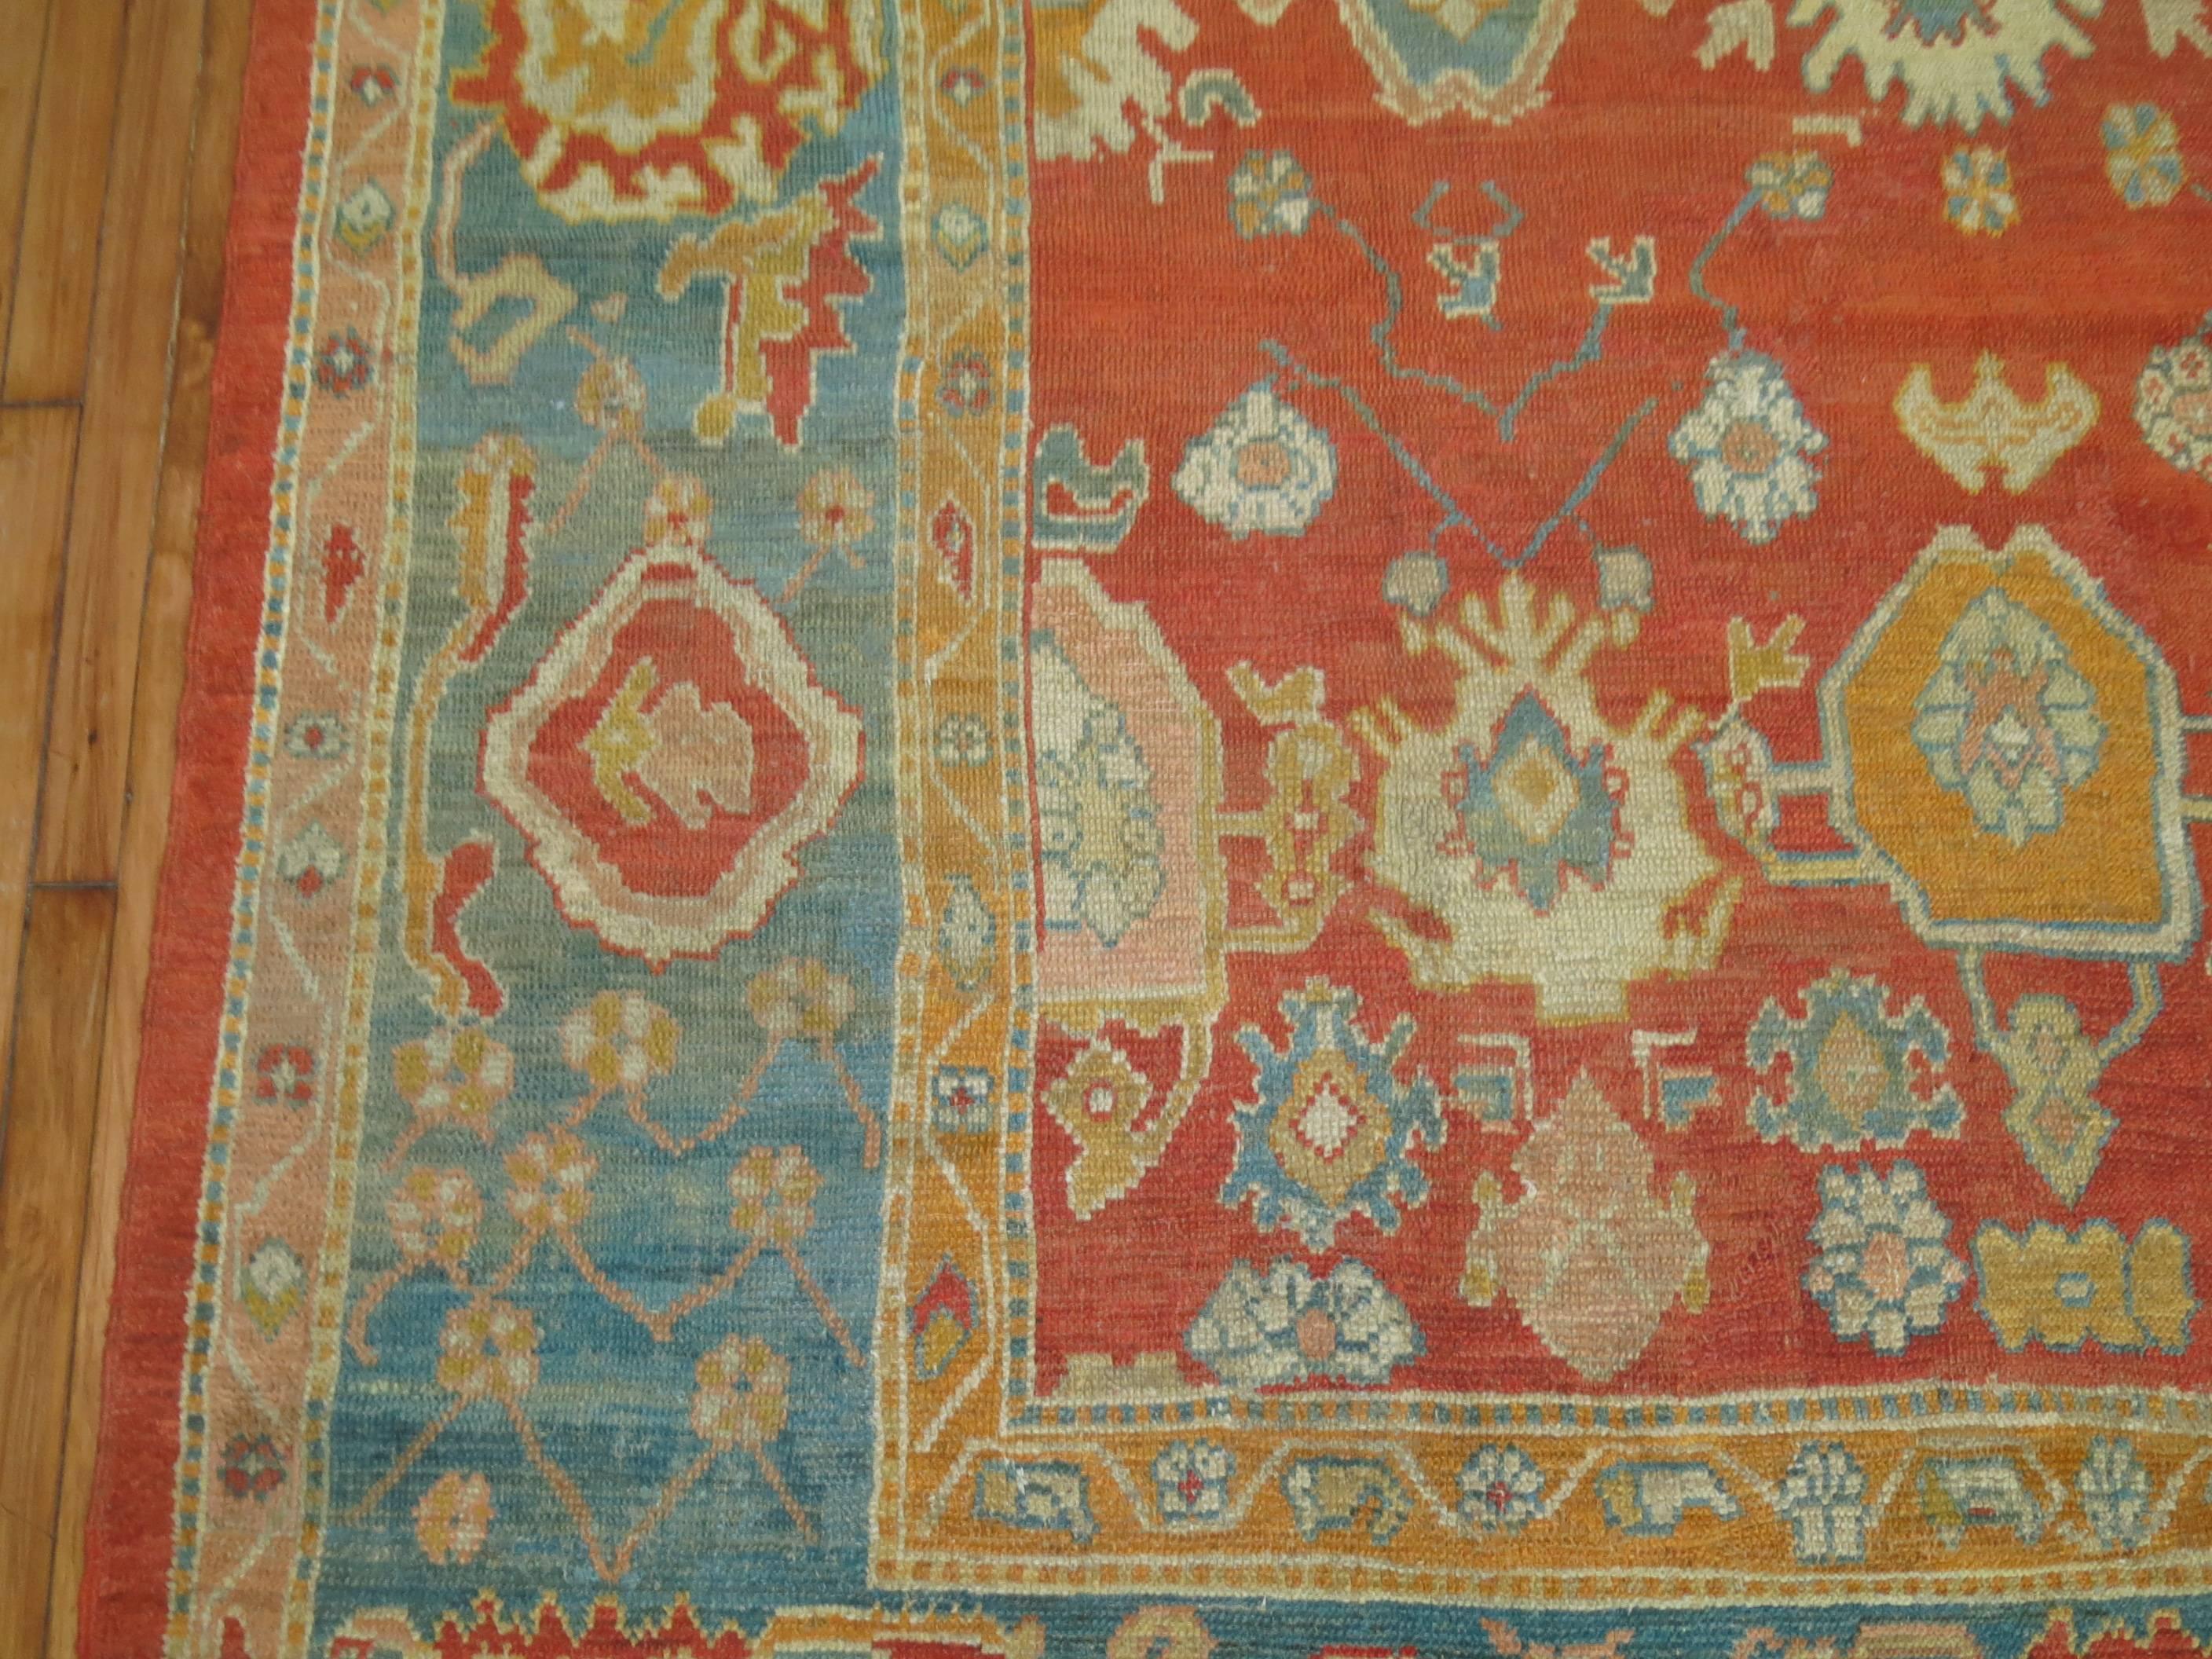 An absolute stunning one of a kind old Oushak with bright and cheerful colors. Coral red field, teal border with gold, ivory and terracotta color shades. A very fun rug to decorate around,

circa 1890-1900. Measures: 8'5'' x 11'6''.